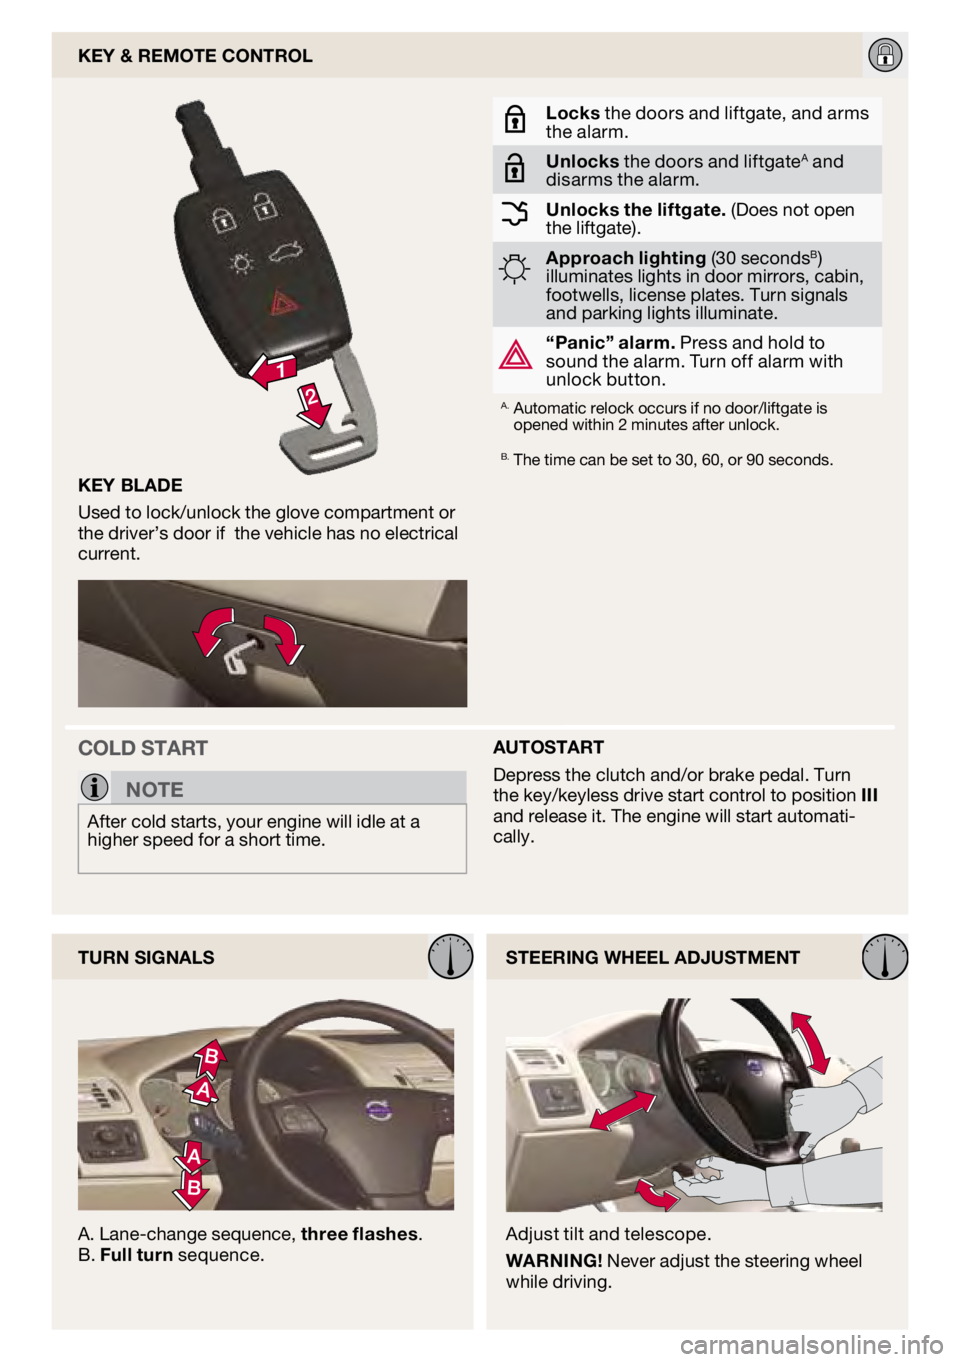 VOLVO C30 2009  Quick Guide AUTOSTART
Depress the clutch and/or brake pedal. Turn 
the key/keyless drive start control to position III 
and release it. The engine will start automati-
cally.
 
 
key 

blAde
Used to lock/unlock t